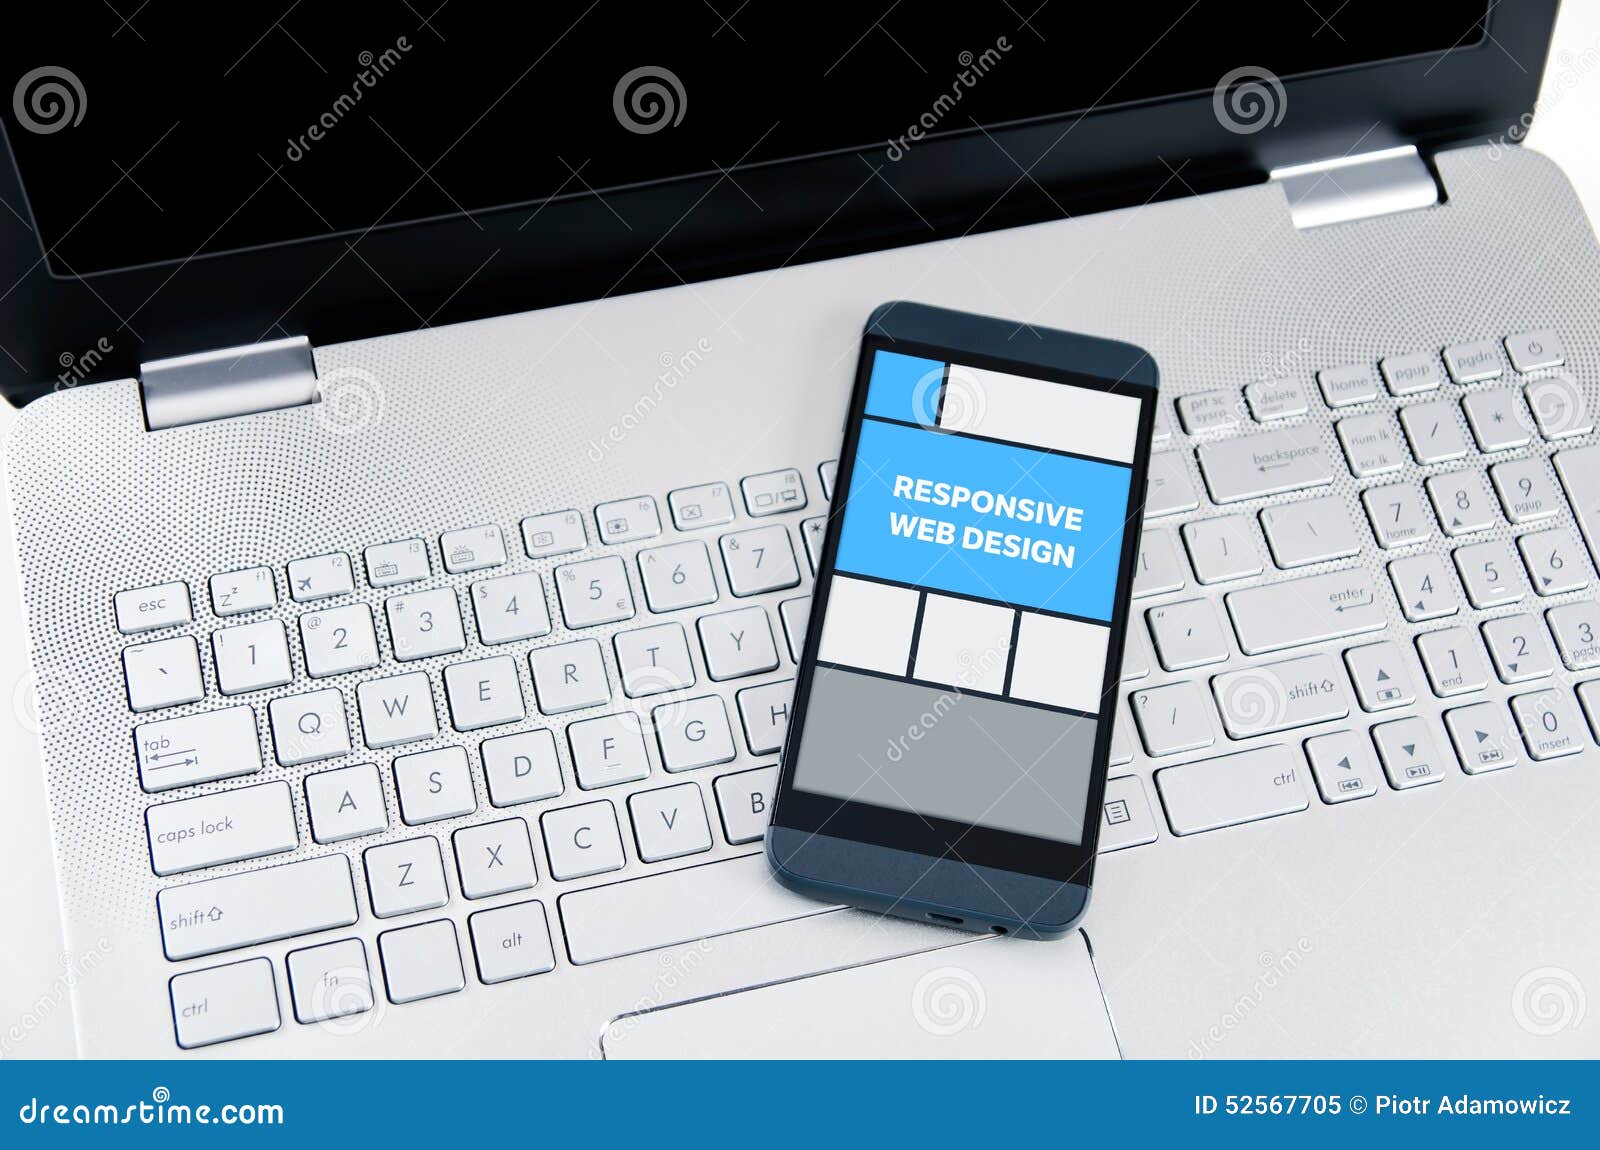 Responsive Web Design On Mobile Devices Stock Image ...